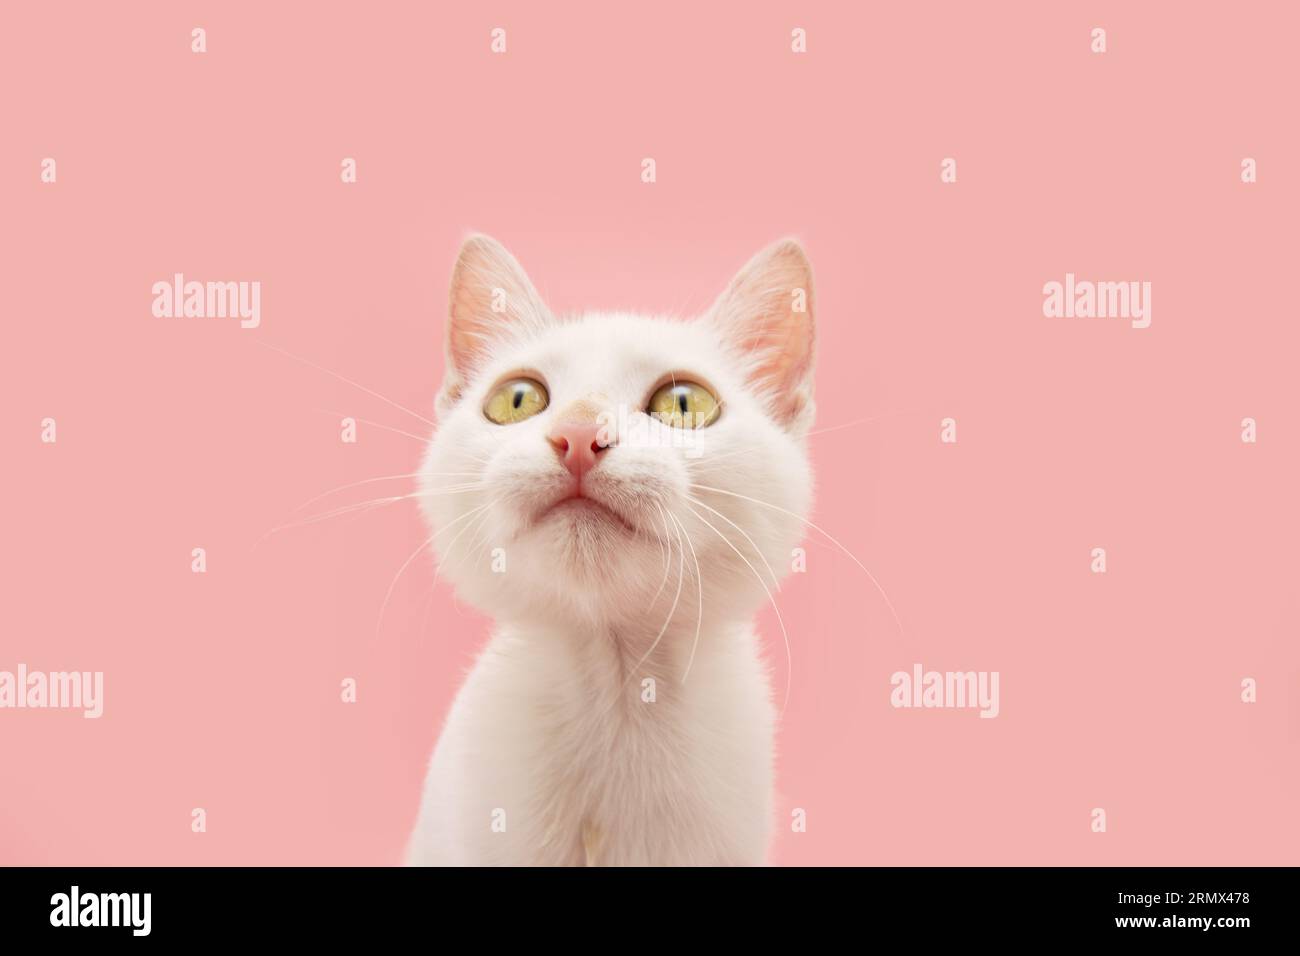 Portrait cute baby cat kitten looking up. Isolated on pink pastel background Stock Photo